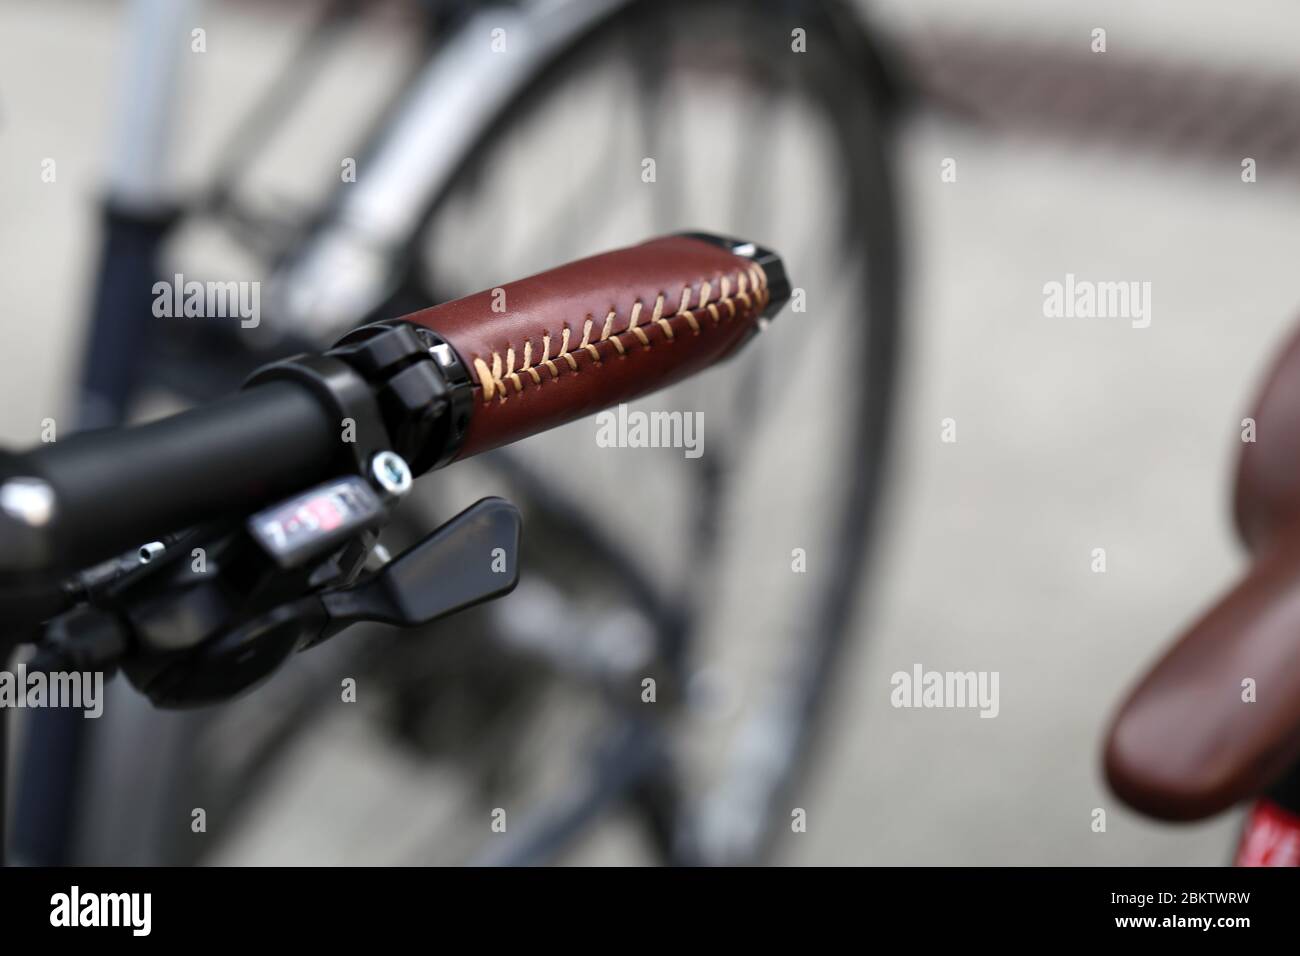 Closeup color image of bicycle handlebar with brown leather details and black ring bell, Baden, Switzerland, March 2020. Bicycles are great exercise. Stock Photo